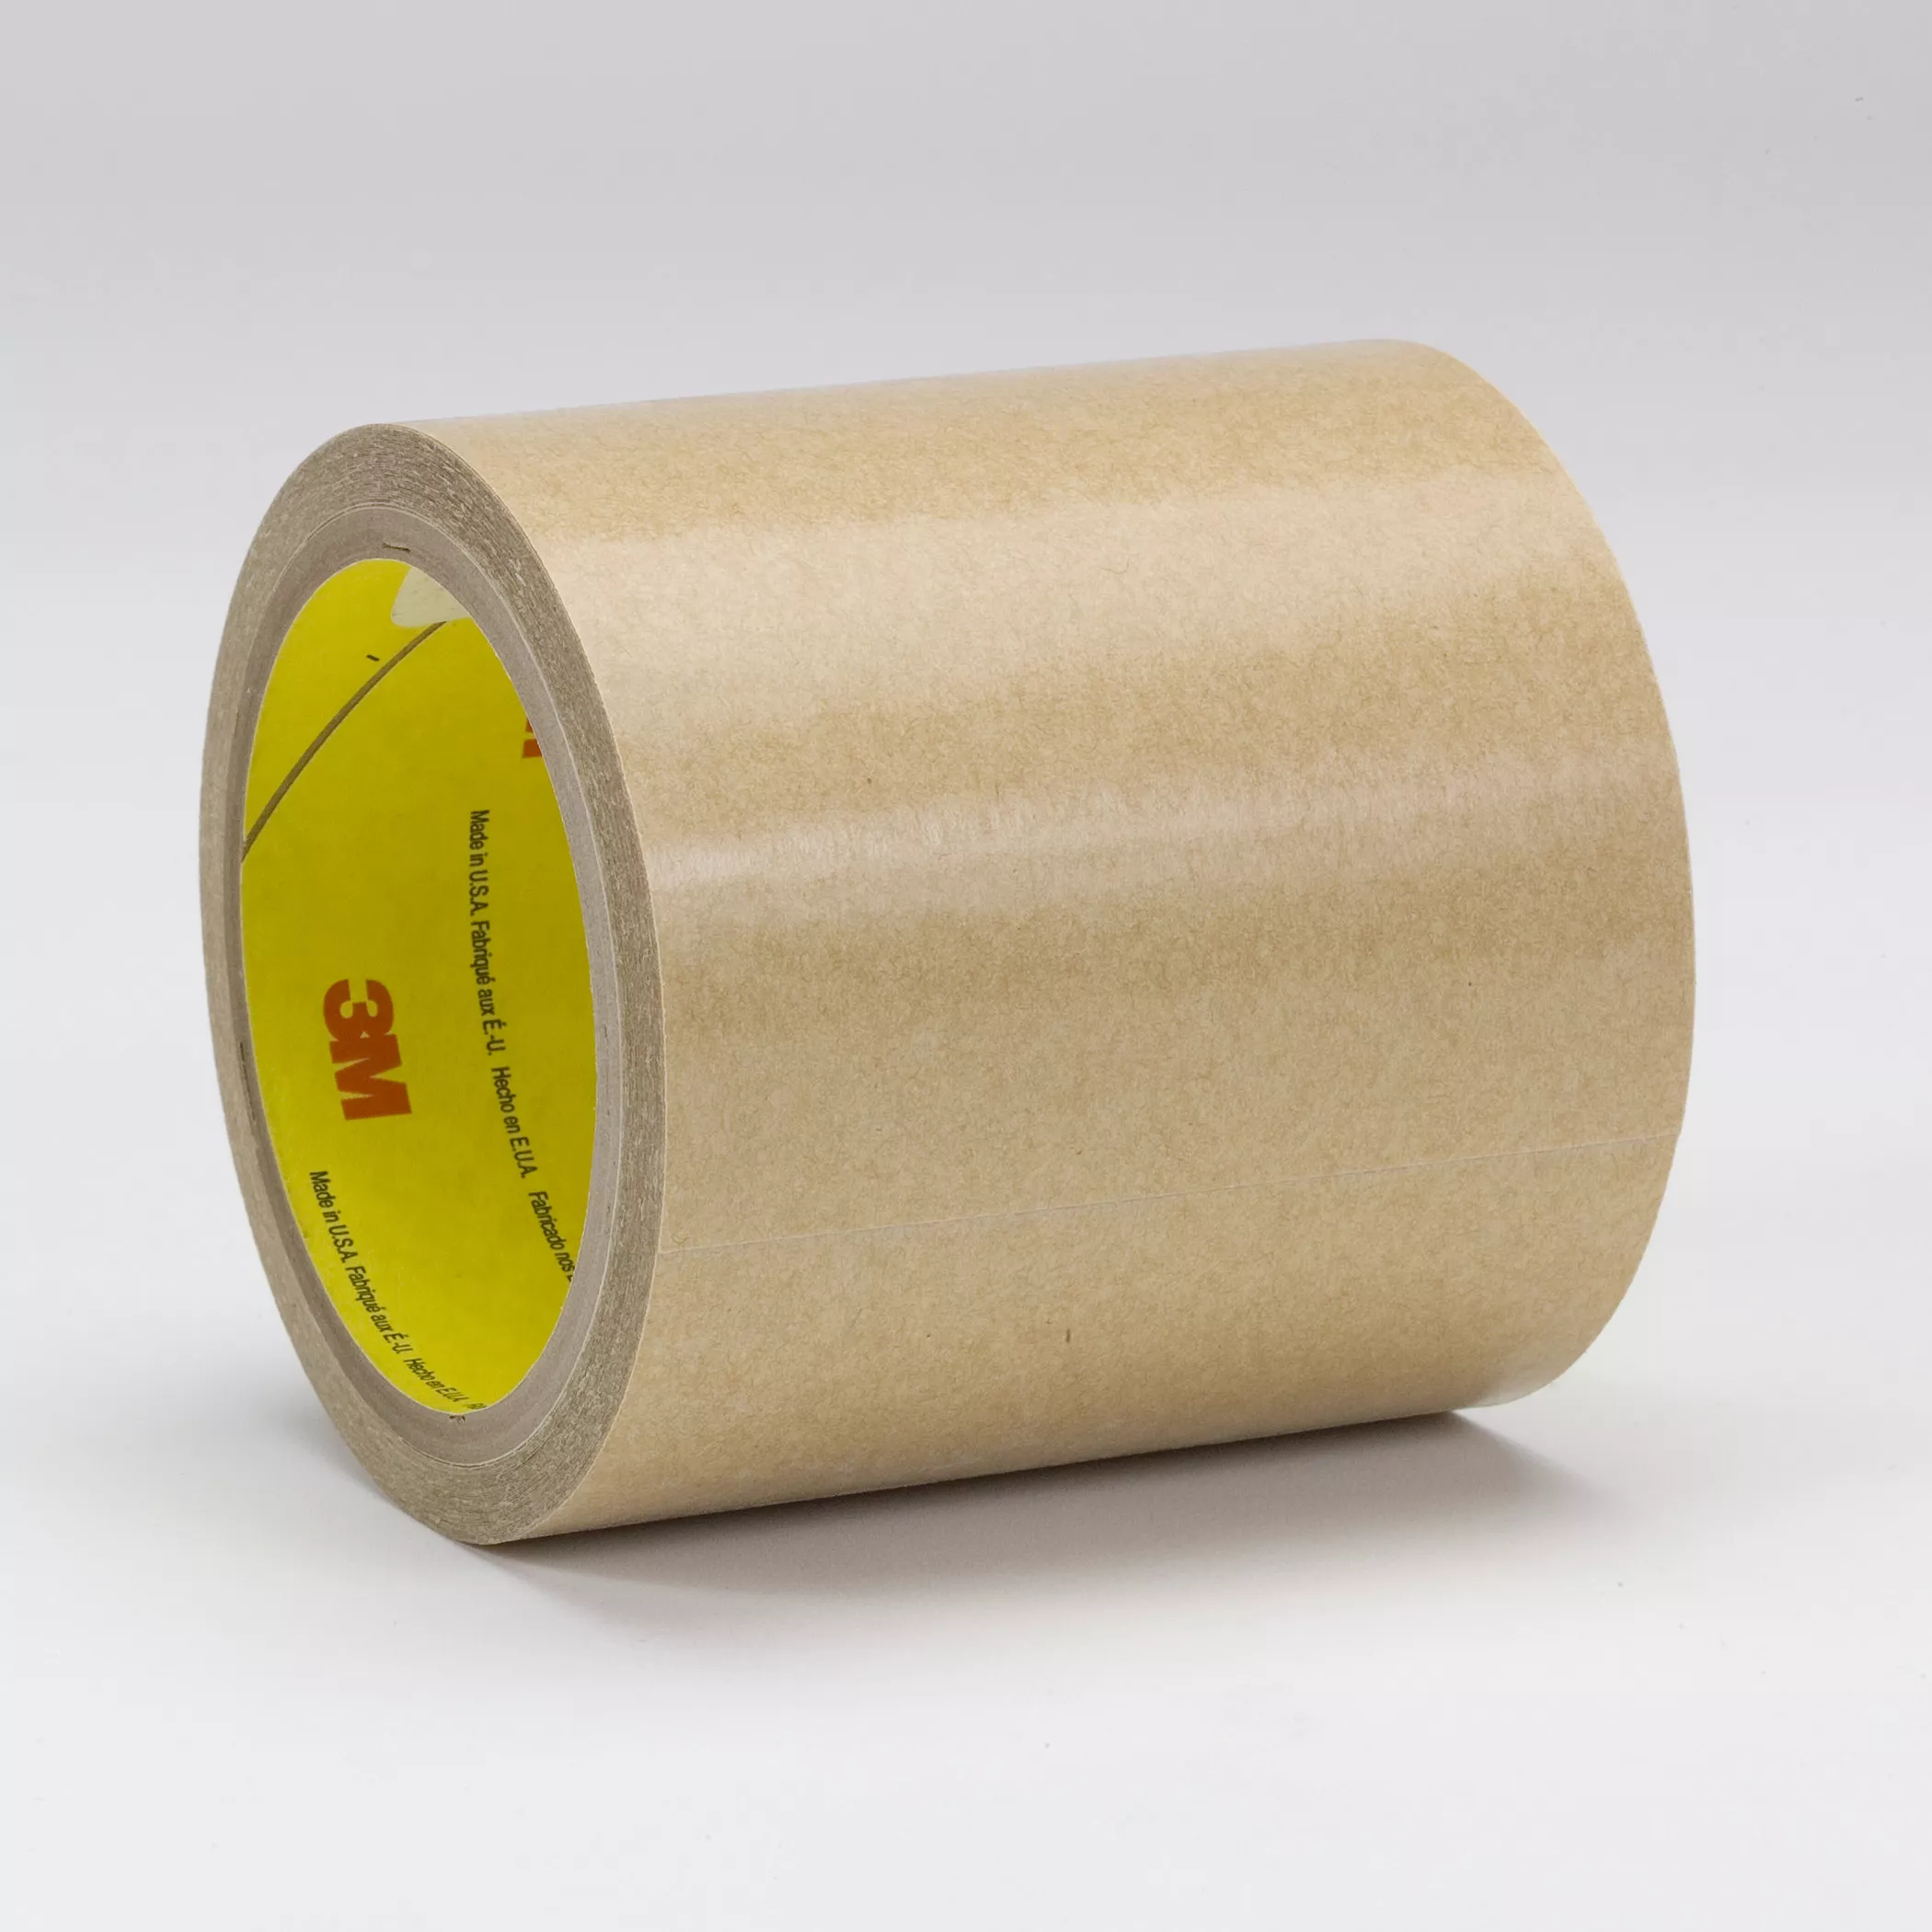 3M™ Adhesive Transfer Tape 9613, Clear, 16 in X 90 yd, 13 mil, 1
Roll/Case